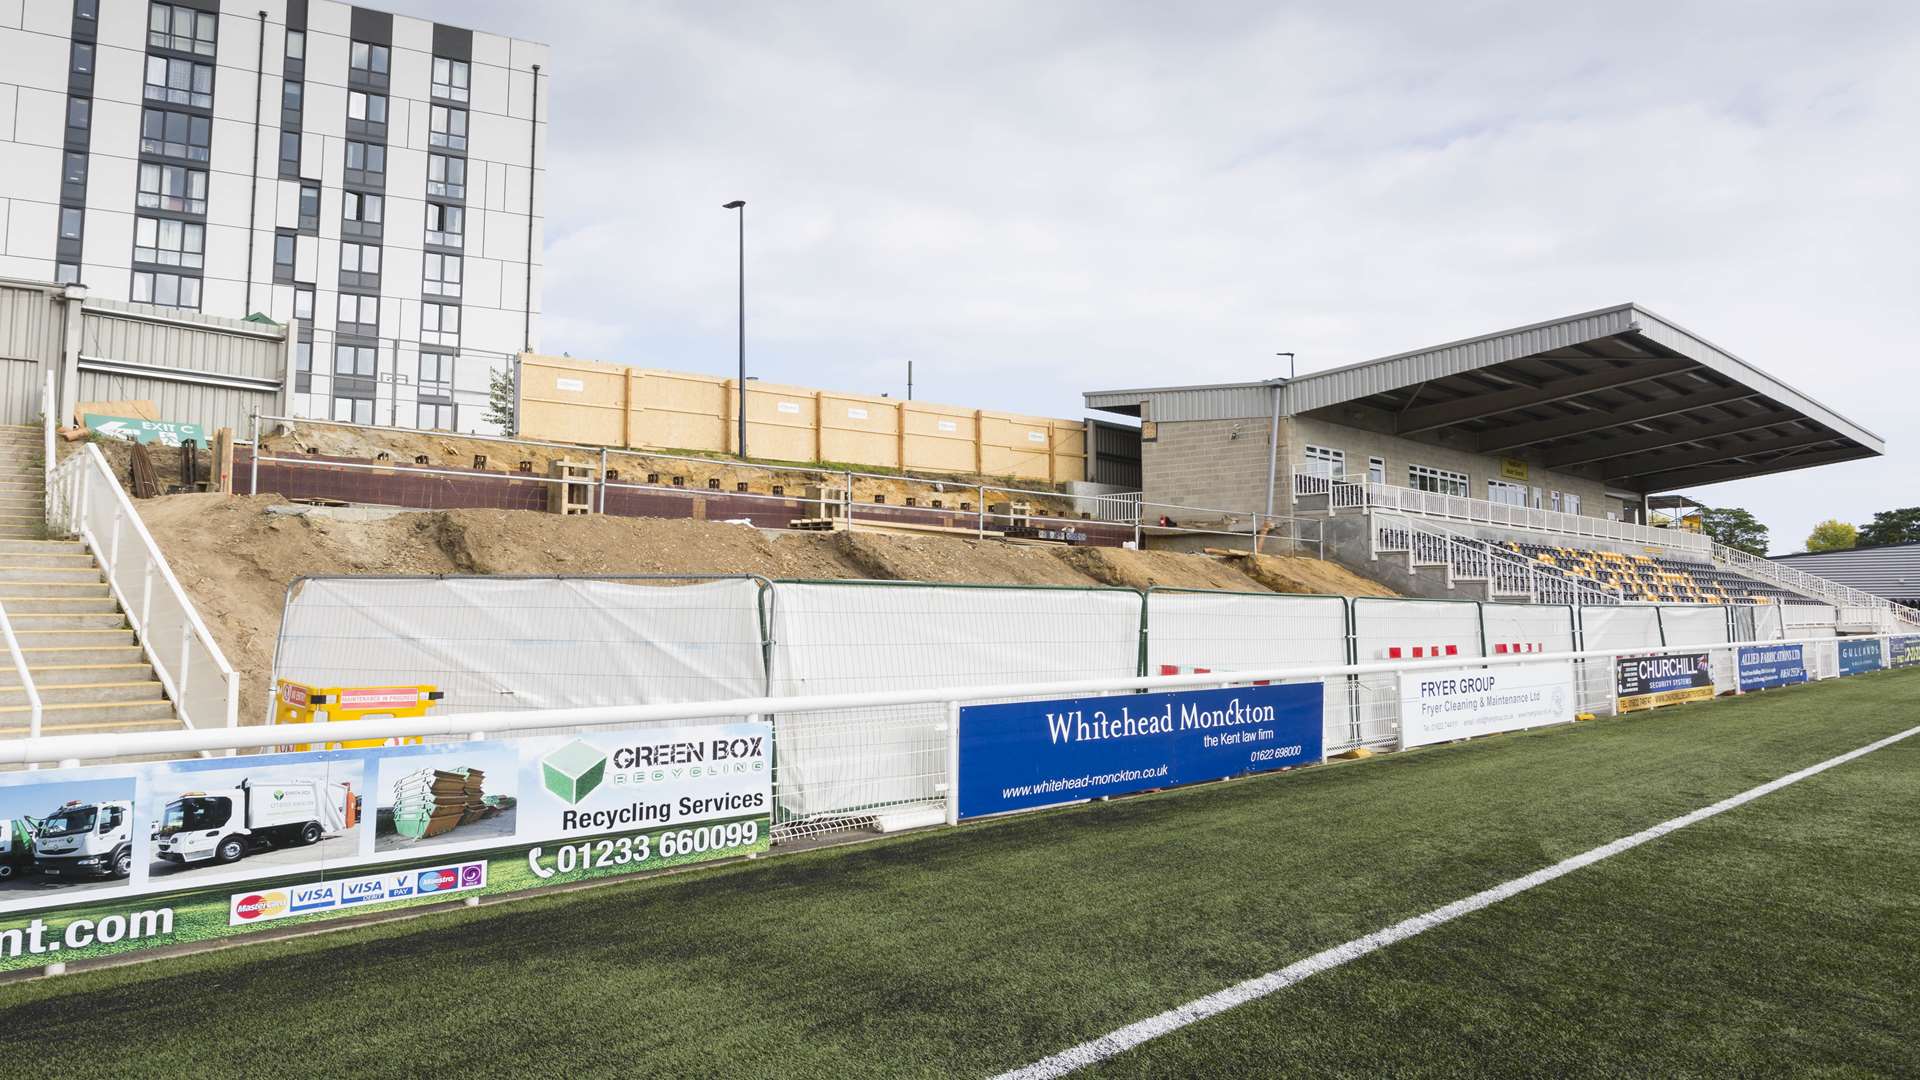 Building work is continuing at Maidstone's Gallagher Stadium Picture: Martin Apps